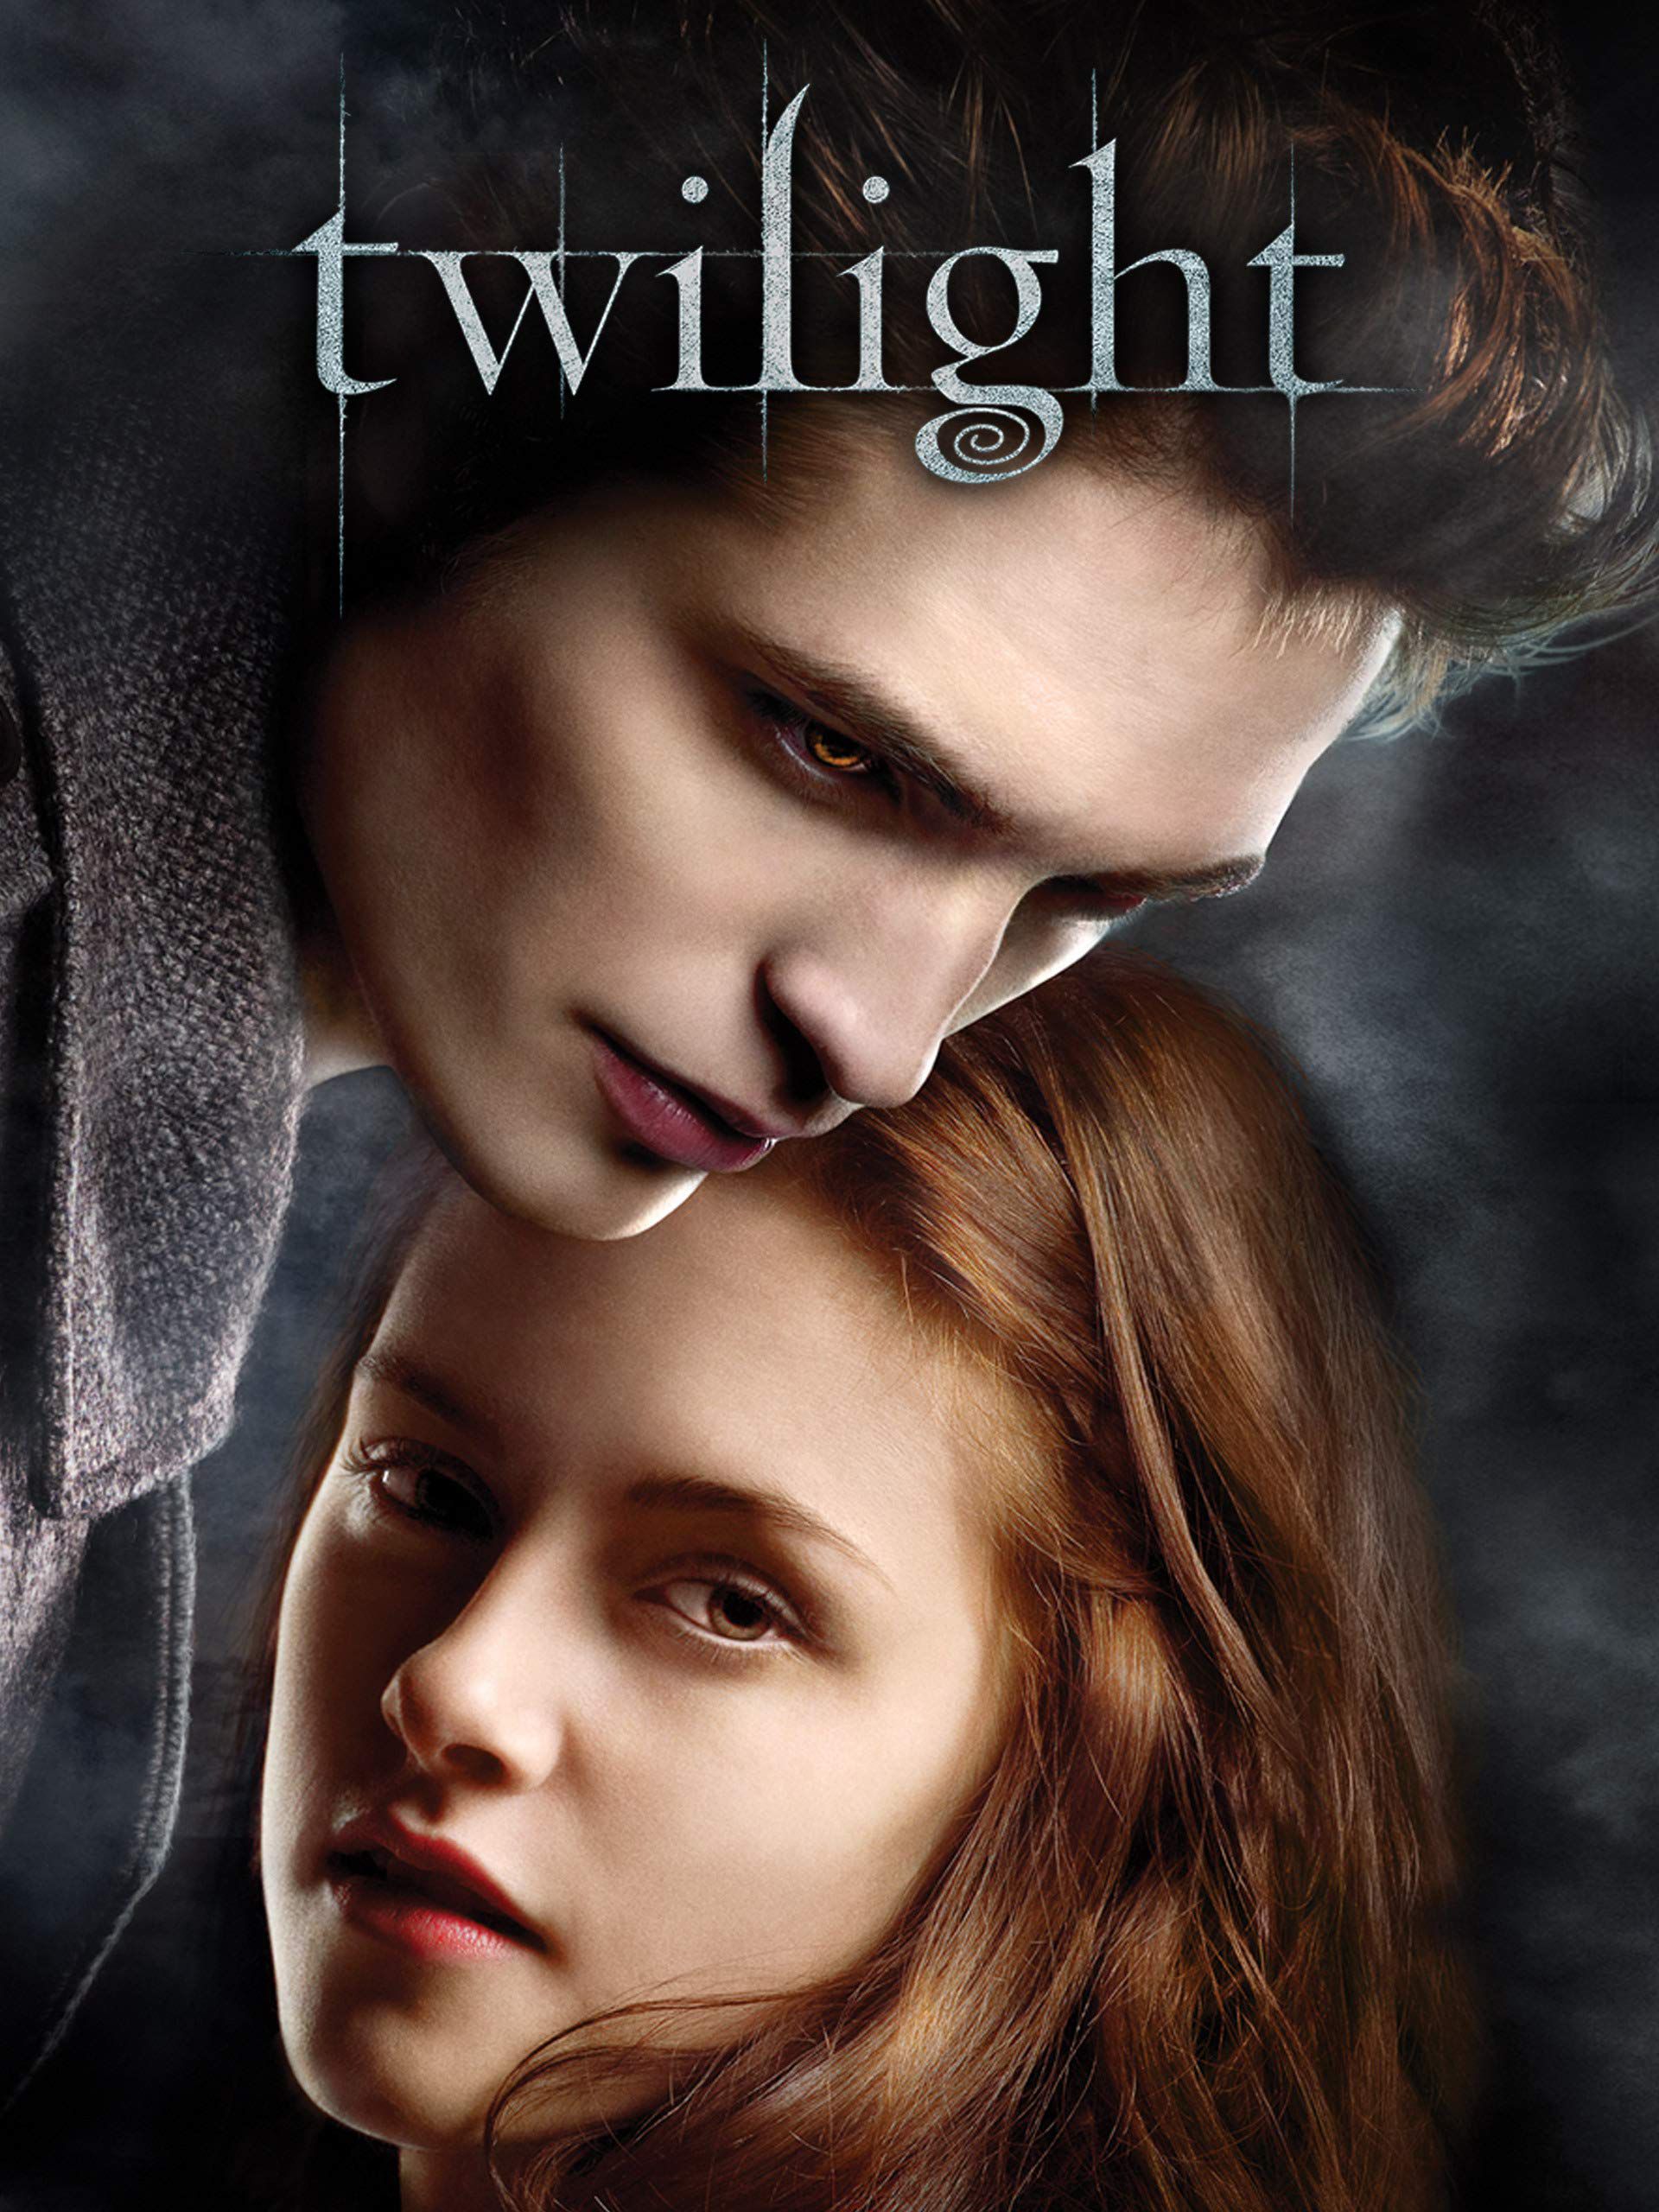 <p><b>Film Adaptations: “Twilight” (2008)</b></p><p><b>Critic Quote: </b>“Bella’s decision to get hot and heavy with a hot-and-hungry vampire, far from seeming like an act of mad, transgressive passion, comes across as merely stupid and ill-considered.” — Variety</p><p>While Stephenie Meyer’s “Twilight” novel was able to dive into character development and provide insight for readers, the movie did not spend enough time allowing viewers into the minds of characters, making their actions seem confusing and at times, comical. As a result, the movie didn’t quite land the way the book did, though it was successful enough at the box office to turn Robert Pattinson and Kristen Stewart into stars and fuel four sequels.</p>